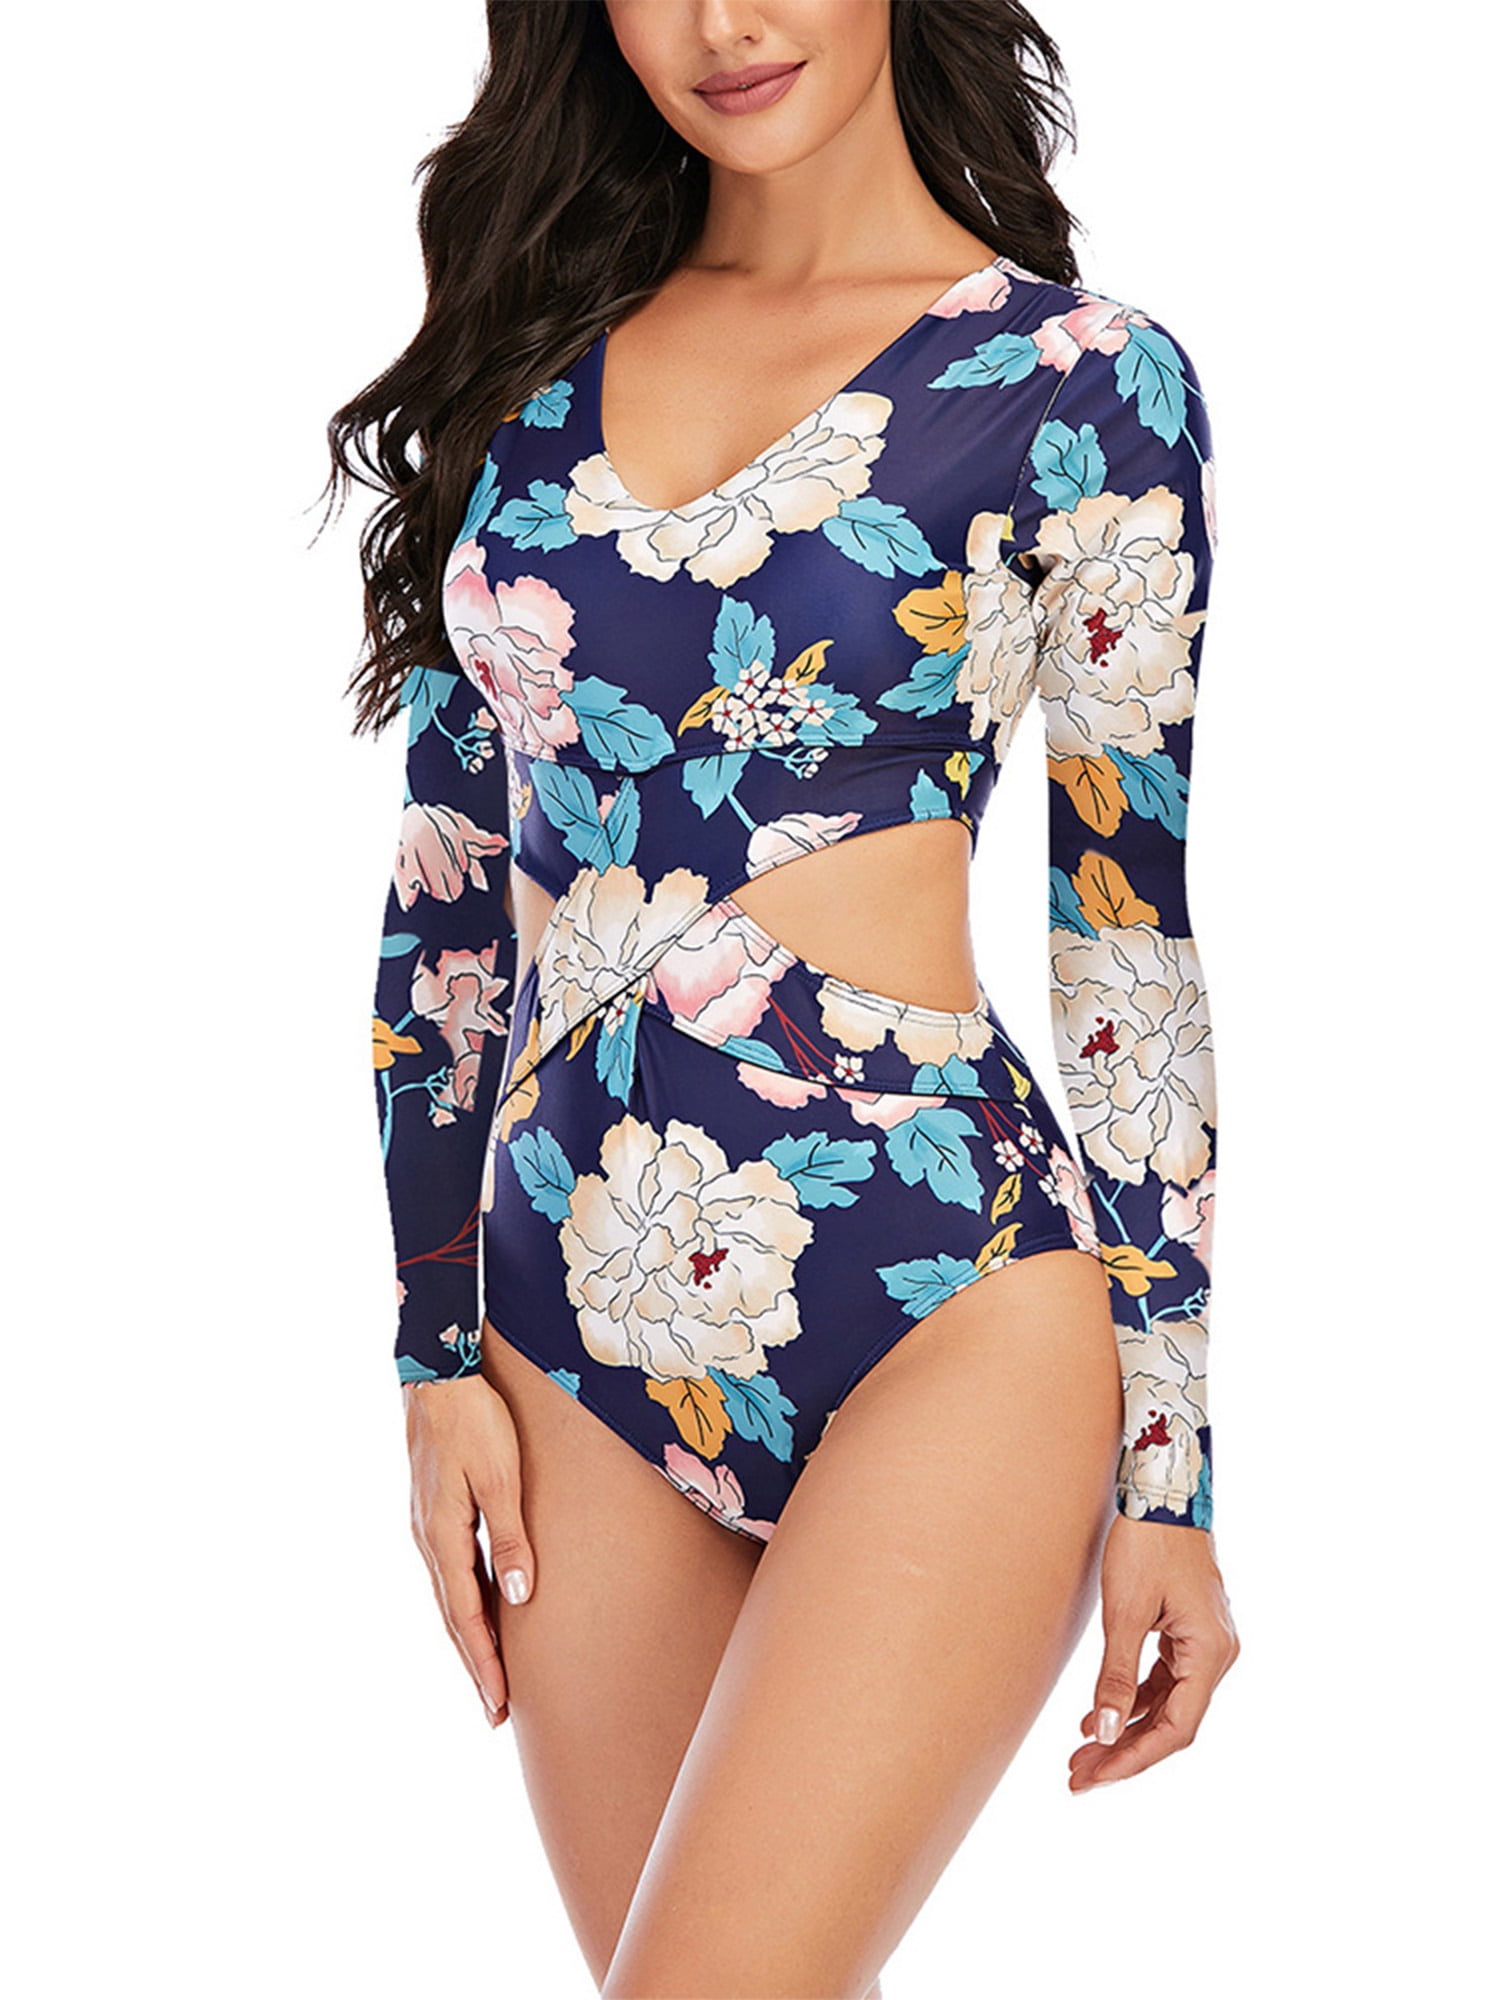 Runtlly Women Rash Guard Long Sleeve Swimsuits UV UPF 50 Sun Protection Zipper Surfing Floral Printed One Piece Swimsuit 